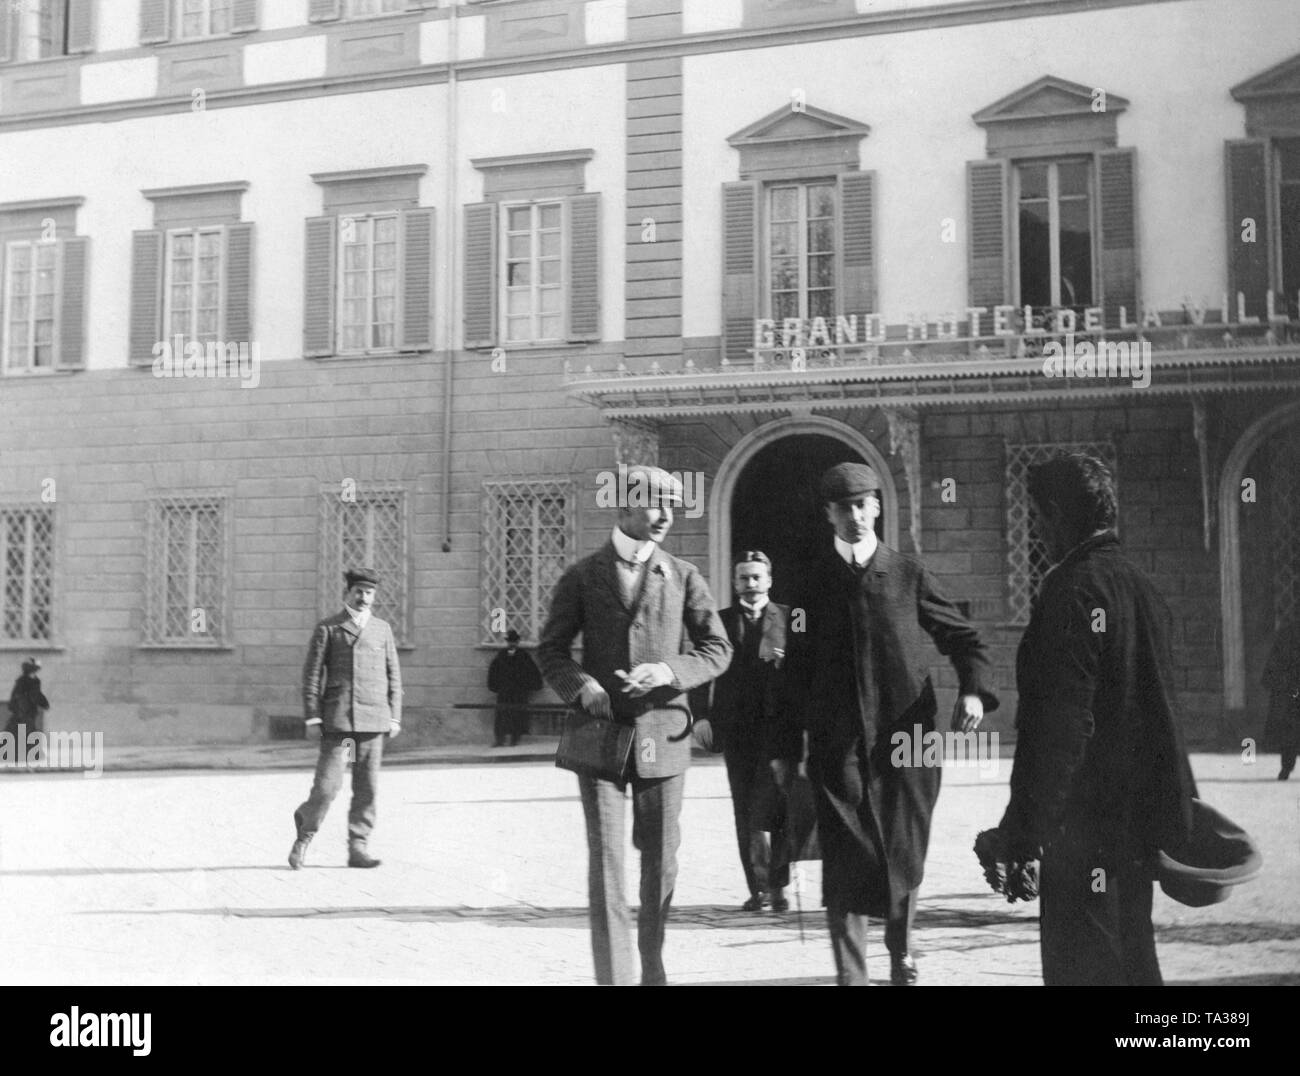 Crown Prince Wilhelm of Prussia with his companions in front of the Grand Hotel Villa Medici. Stock Photo